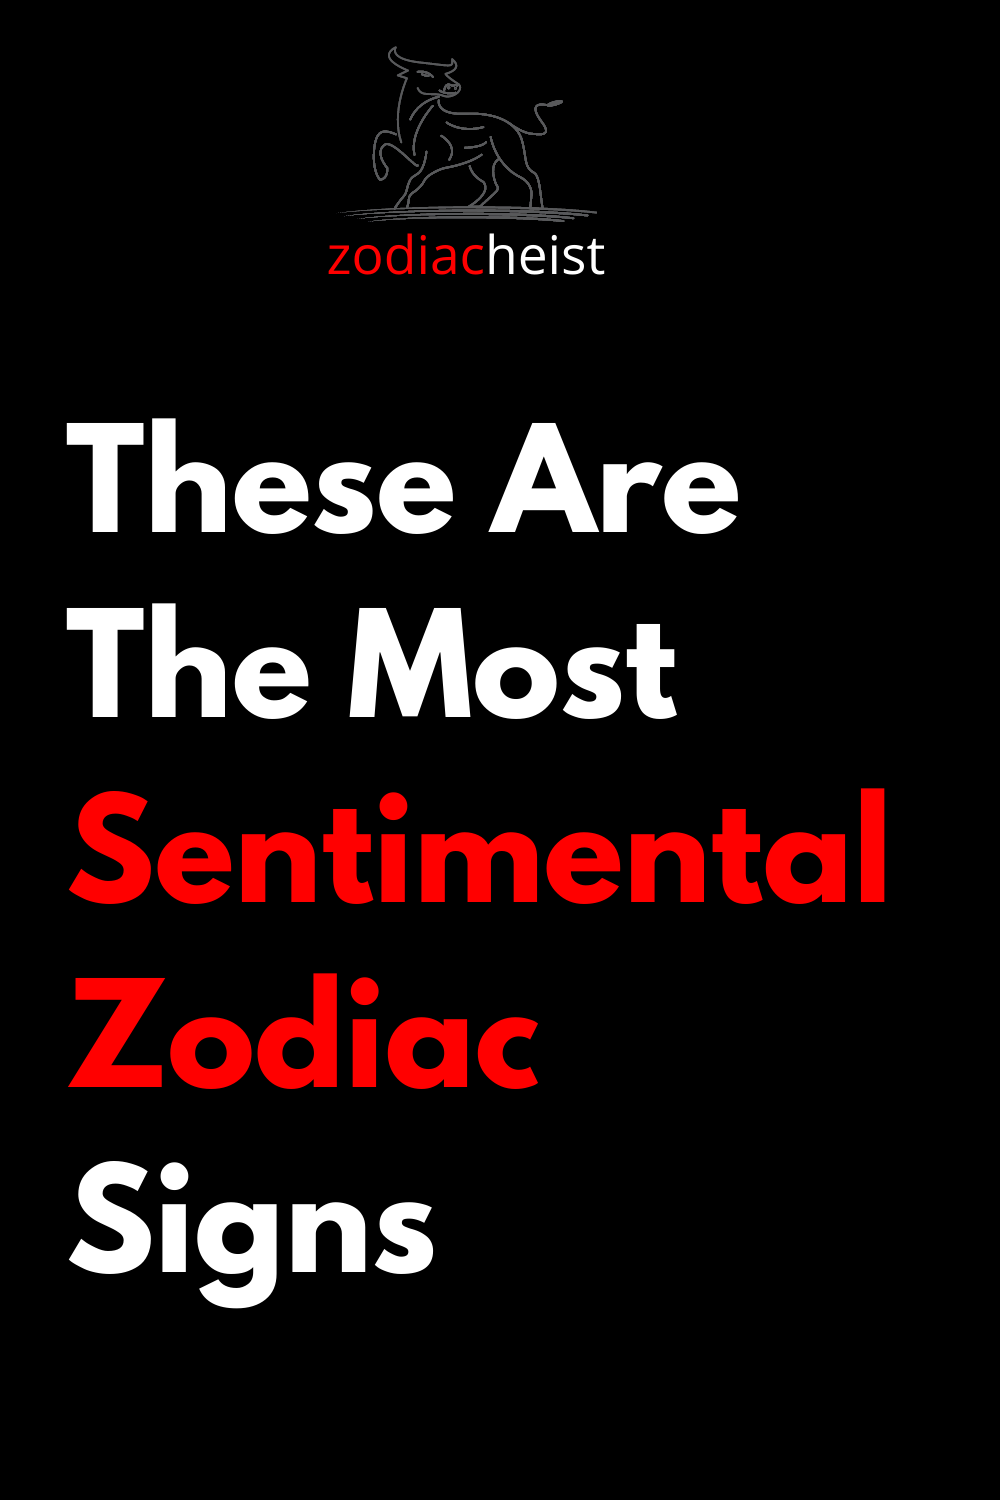 These Are The Most Sentimental Zodiac Signs